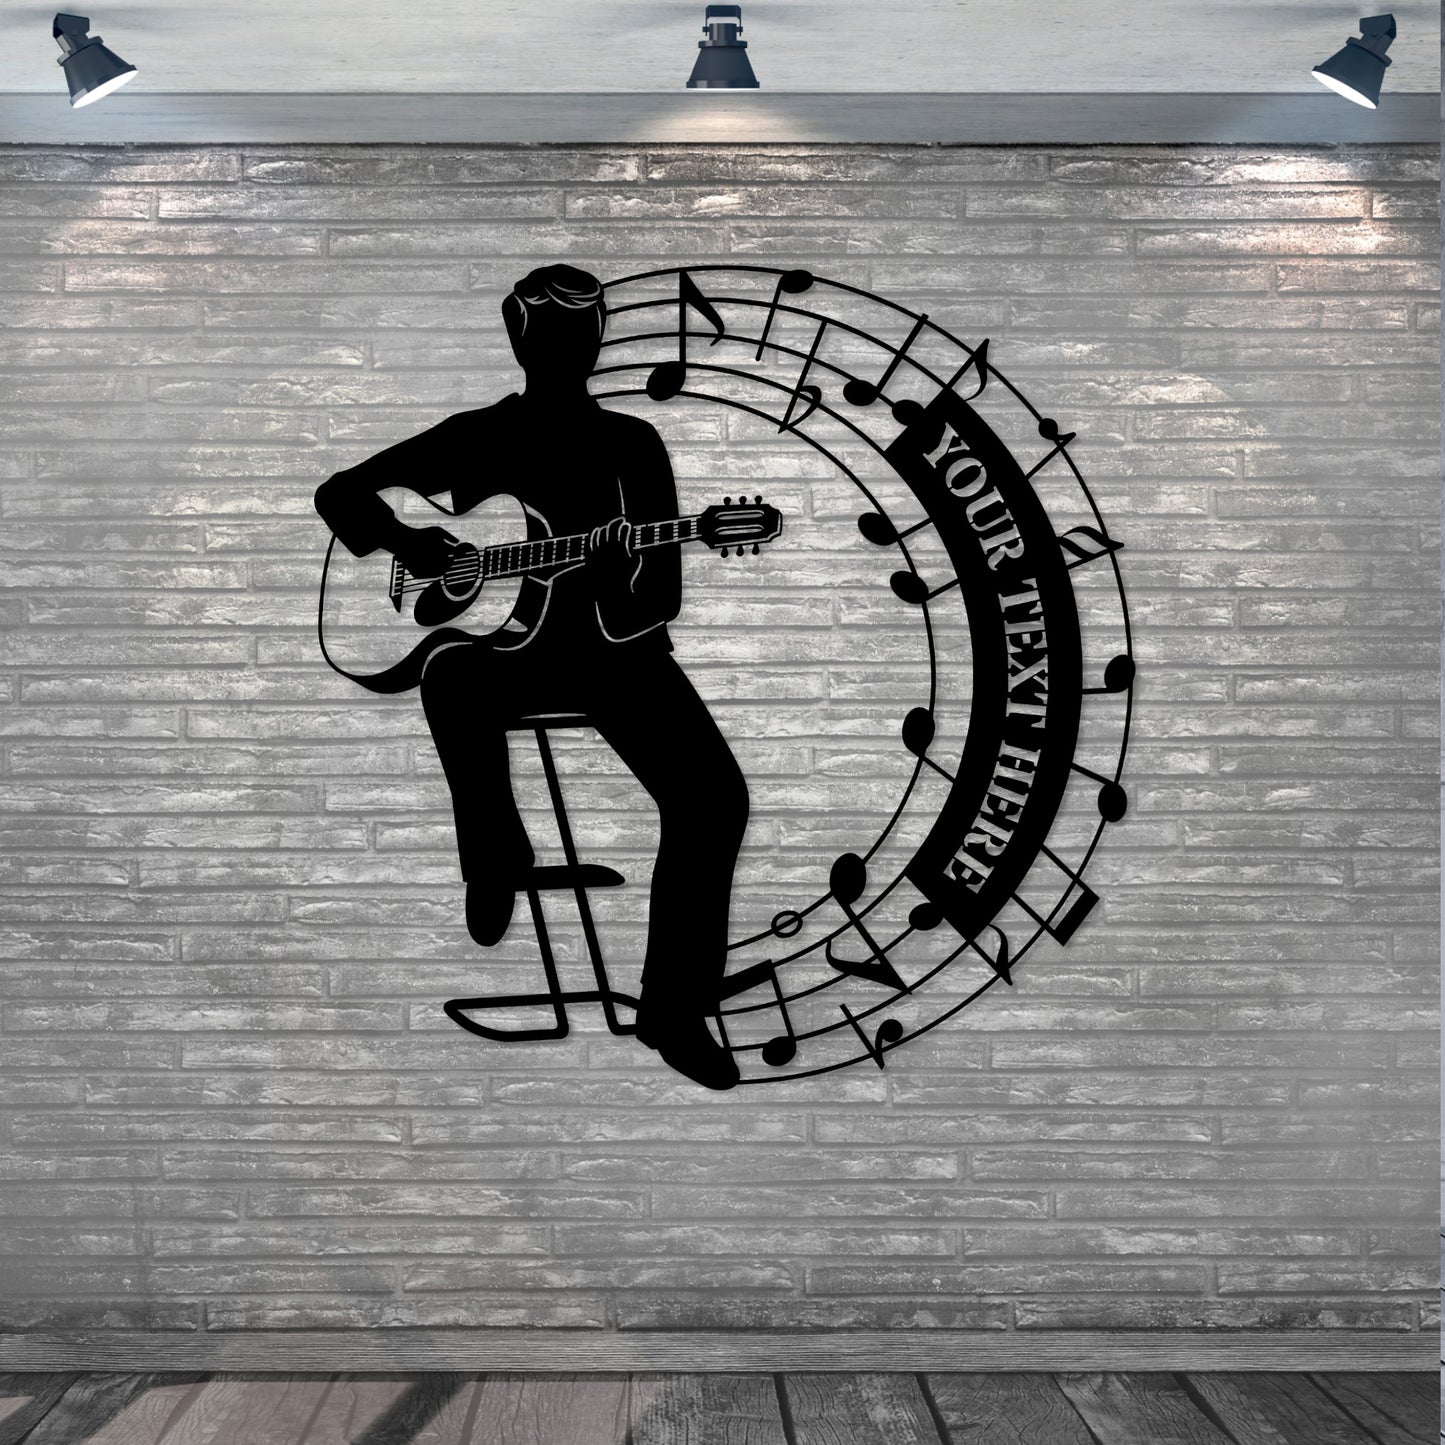 Personalized Male Music Performer Name Metal Sign. Custom Acoustic Guitarist Wall Decor Gift. Musician artist Wall Hanging. Music Room Decor